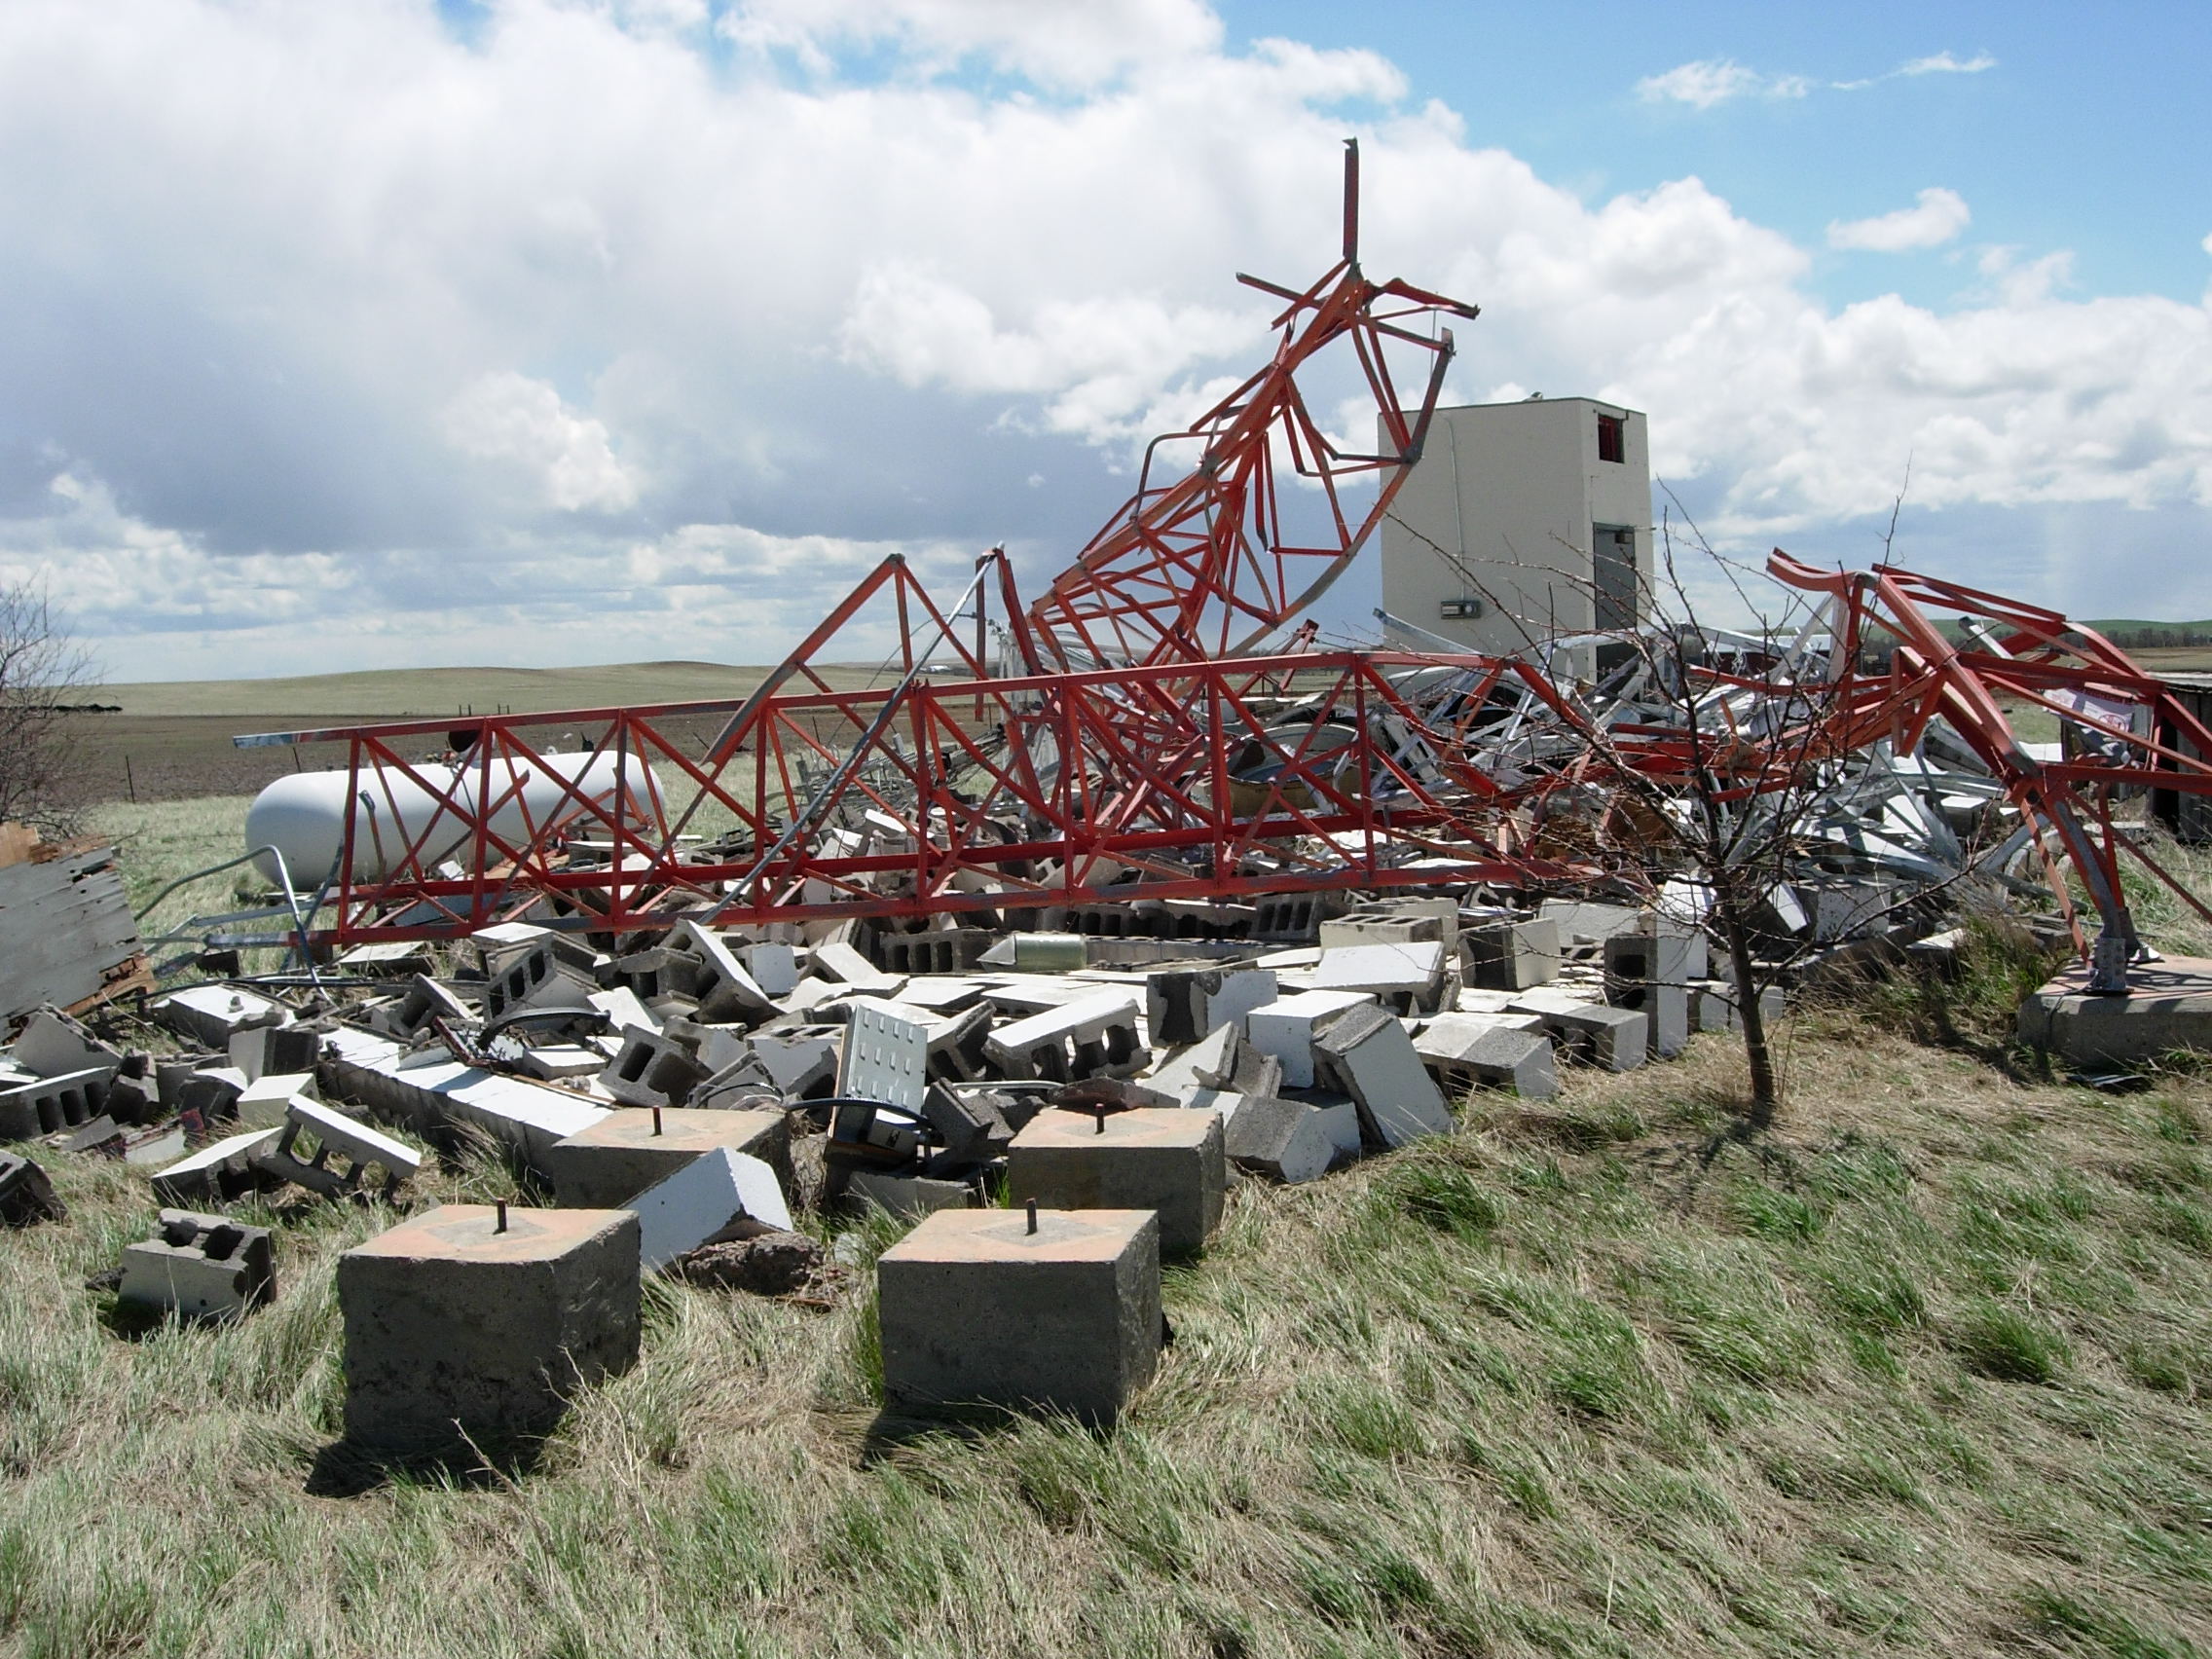 A microwave tower toppled by the winds